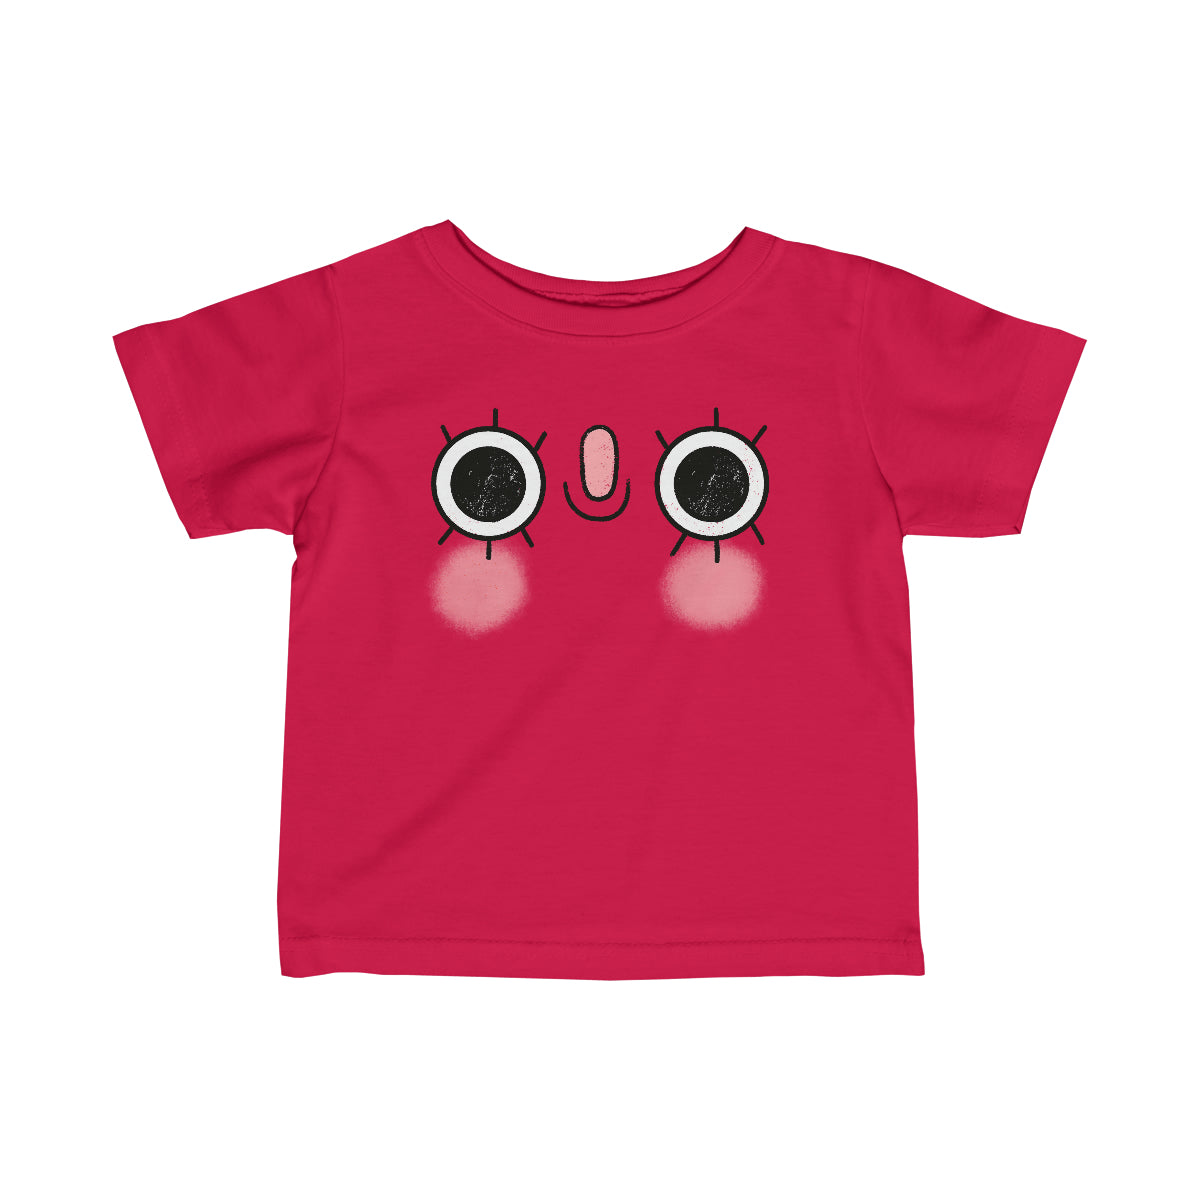 Happy Hungry Toddler Tee